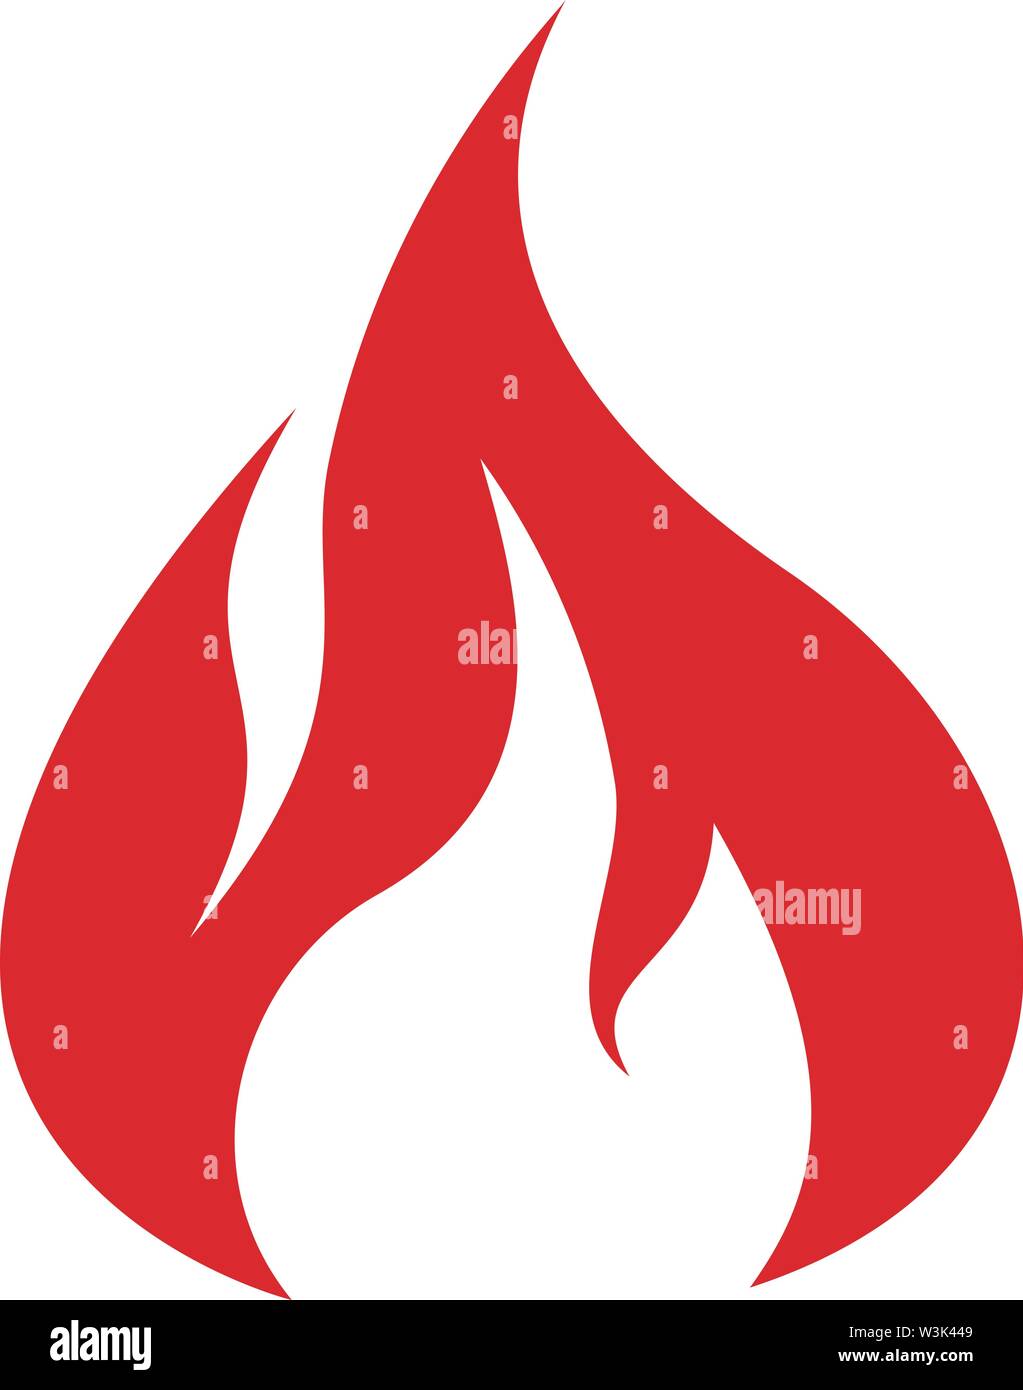 simple red flame or fire icon vector illustration Stock Vector